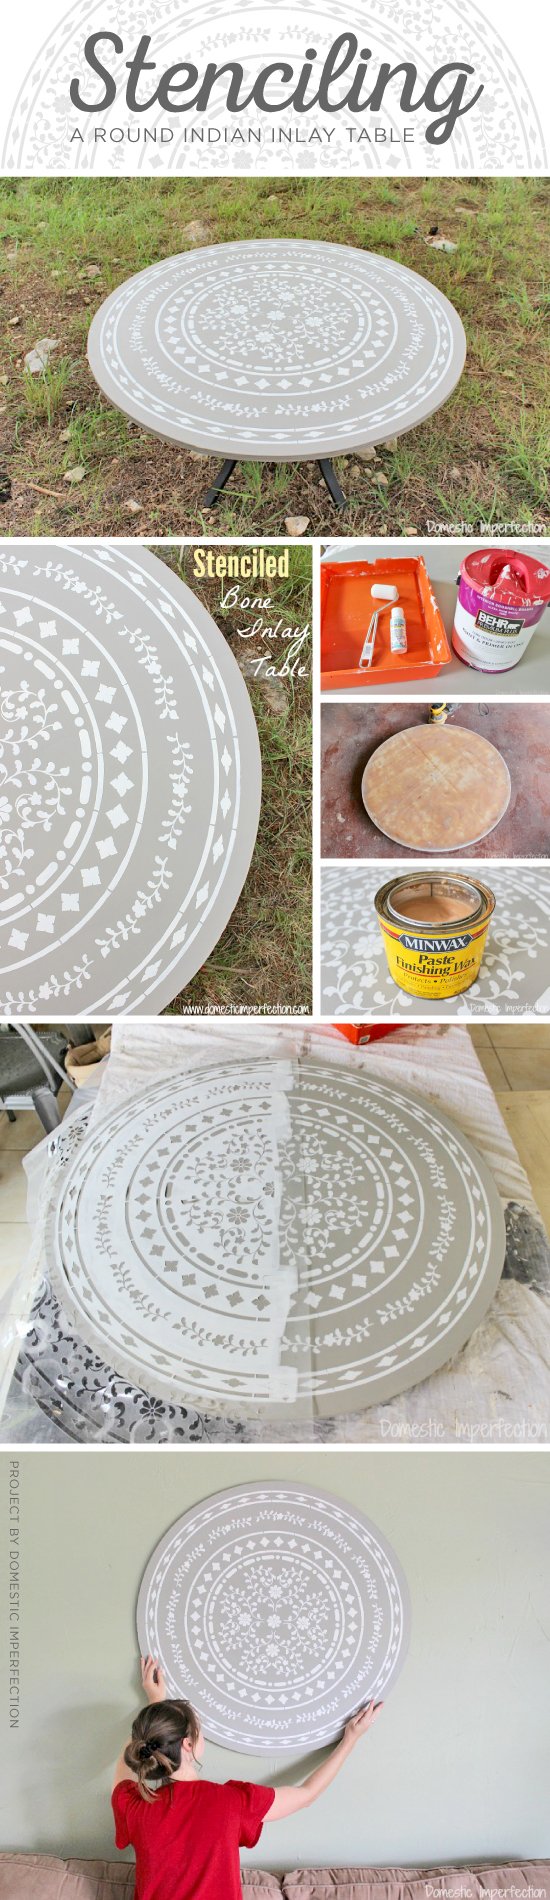 Cutting Edge Stencils shares a DIY round stenciled table using the Indian Inlay Medallion to achieve a faux bone inlay look. http://www.cuttingedgestencils.com/indian-inlay-stencil-medallion-kim-myles-stencils.html